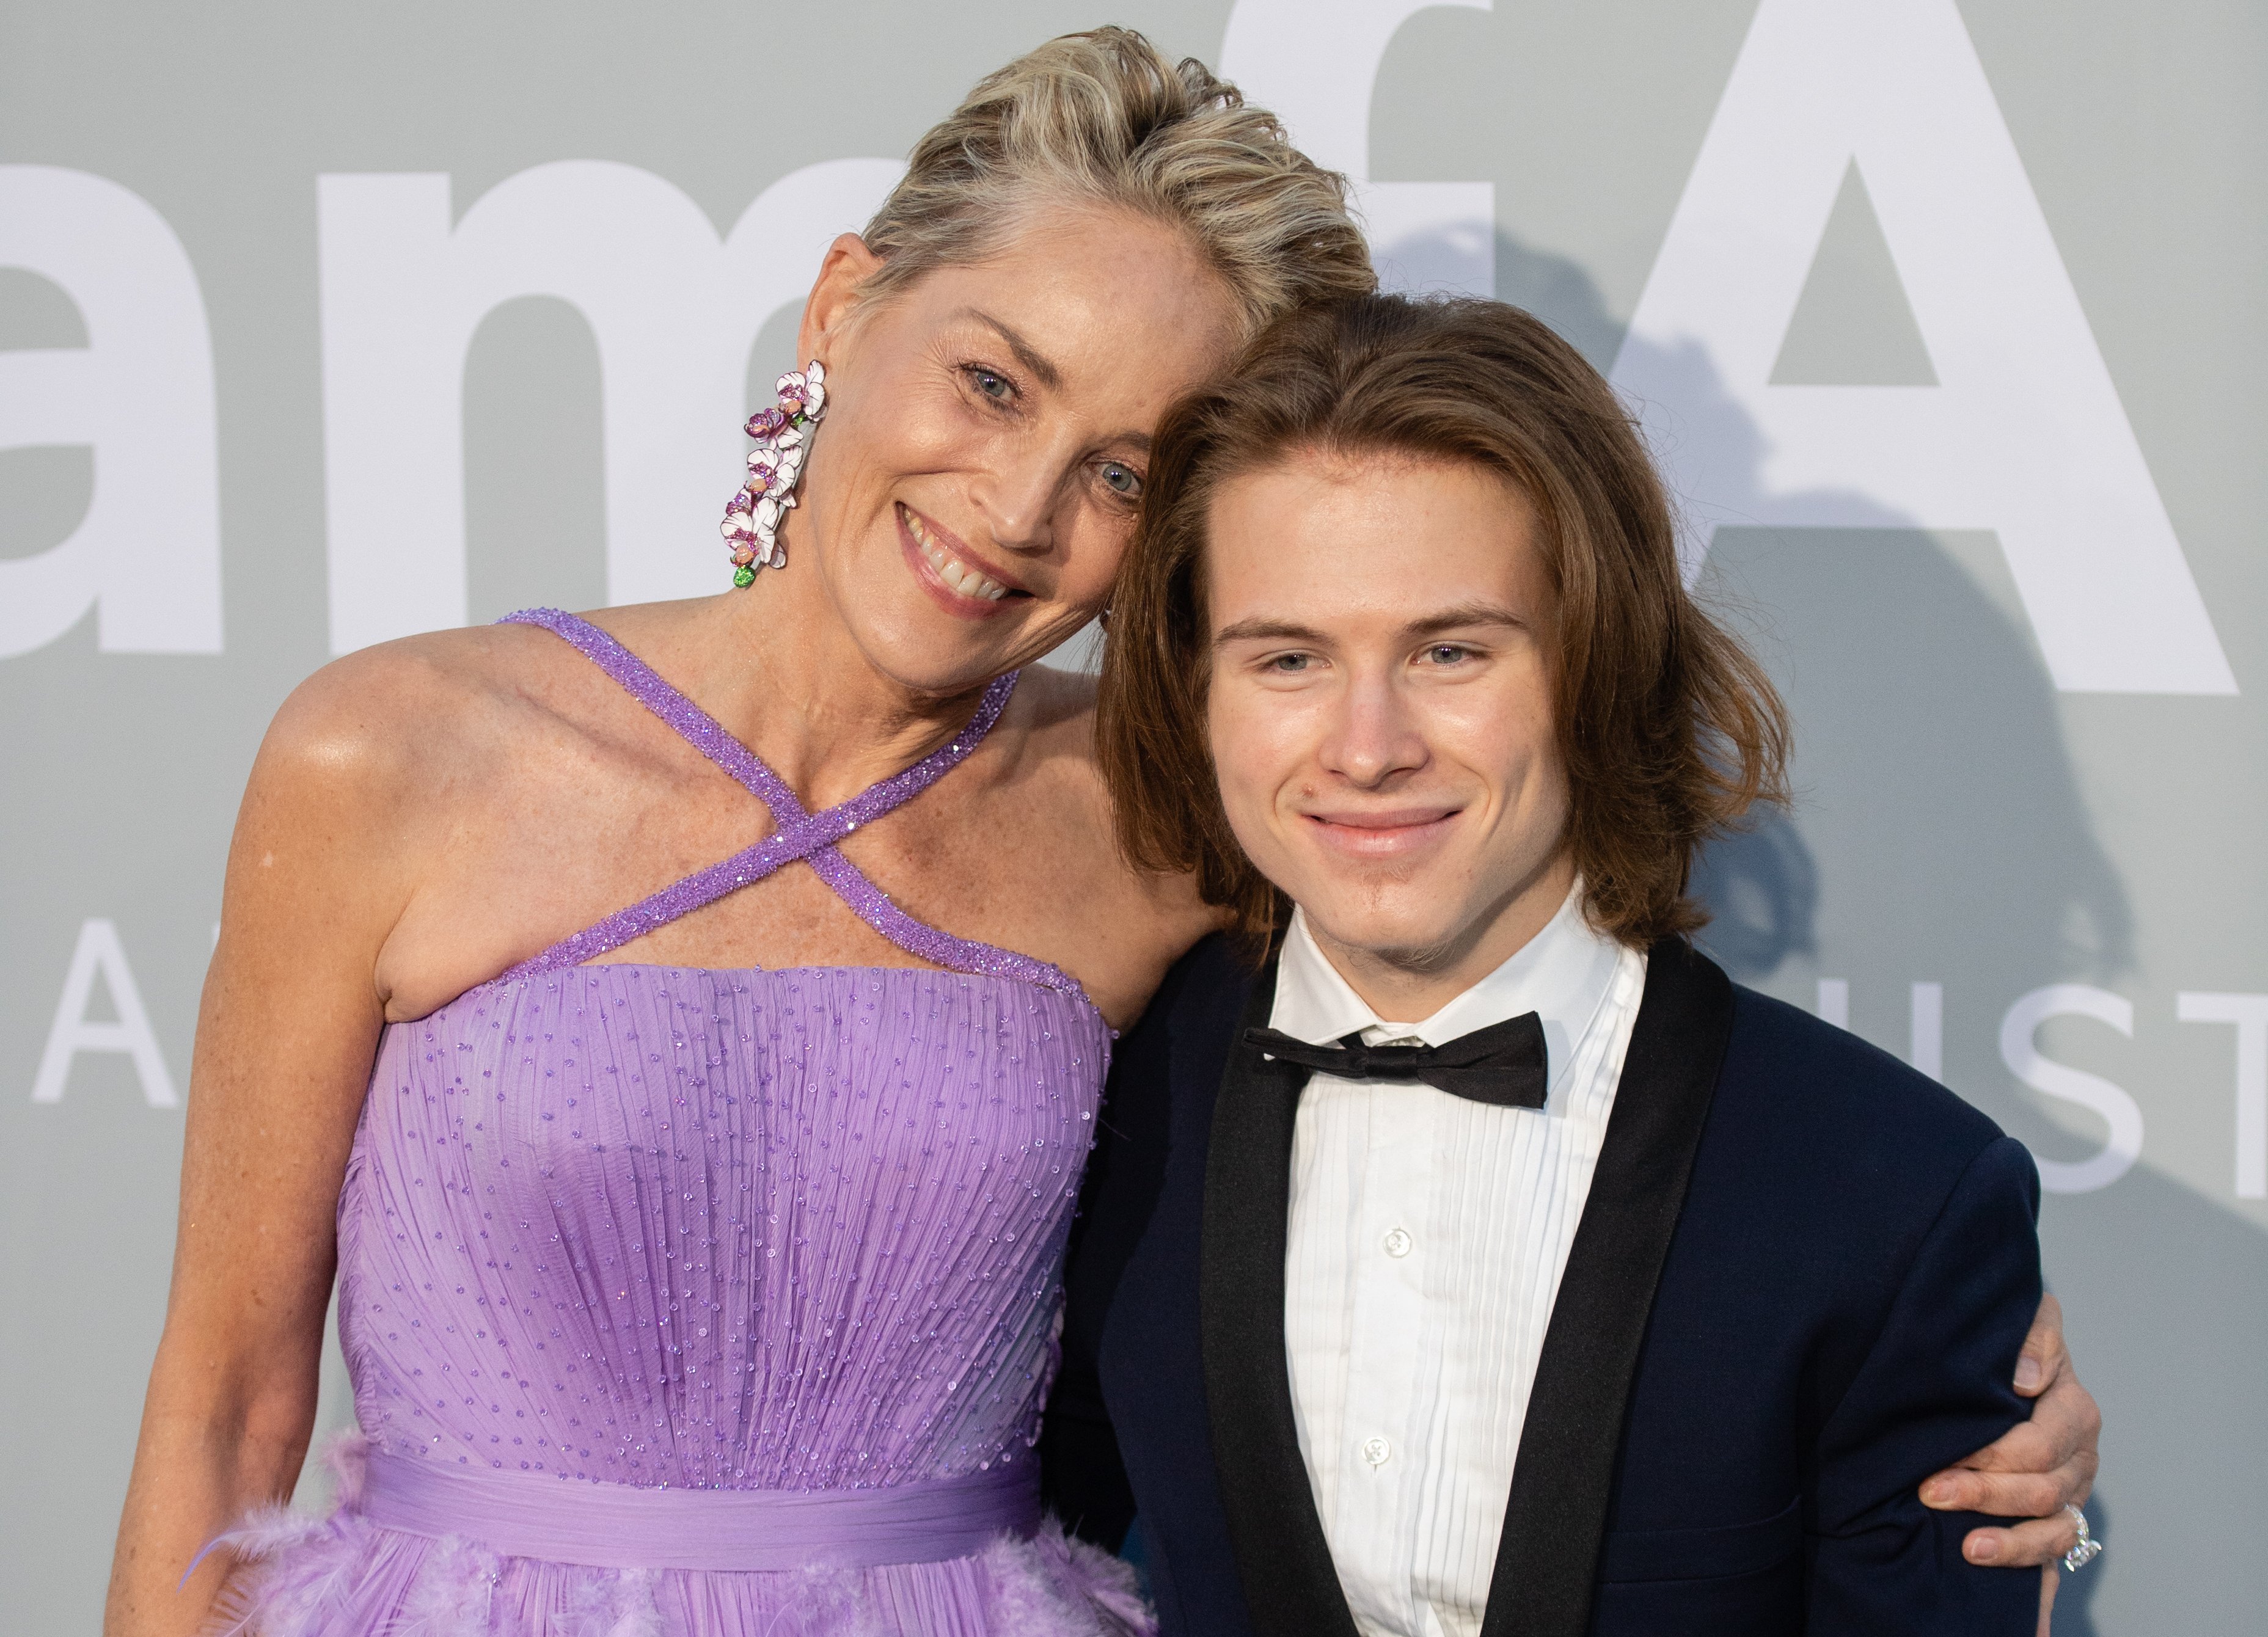 Sharon Stone and Roan Bronstein at the amfAR Cannes Gala during the 74th Annual Cannes Film Festival on July 16, 2021, in Cap d'Antibes, France. | Source: Samir Hussein/WireImage/Getty Images